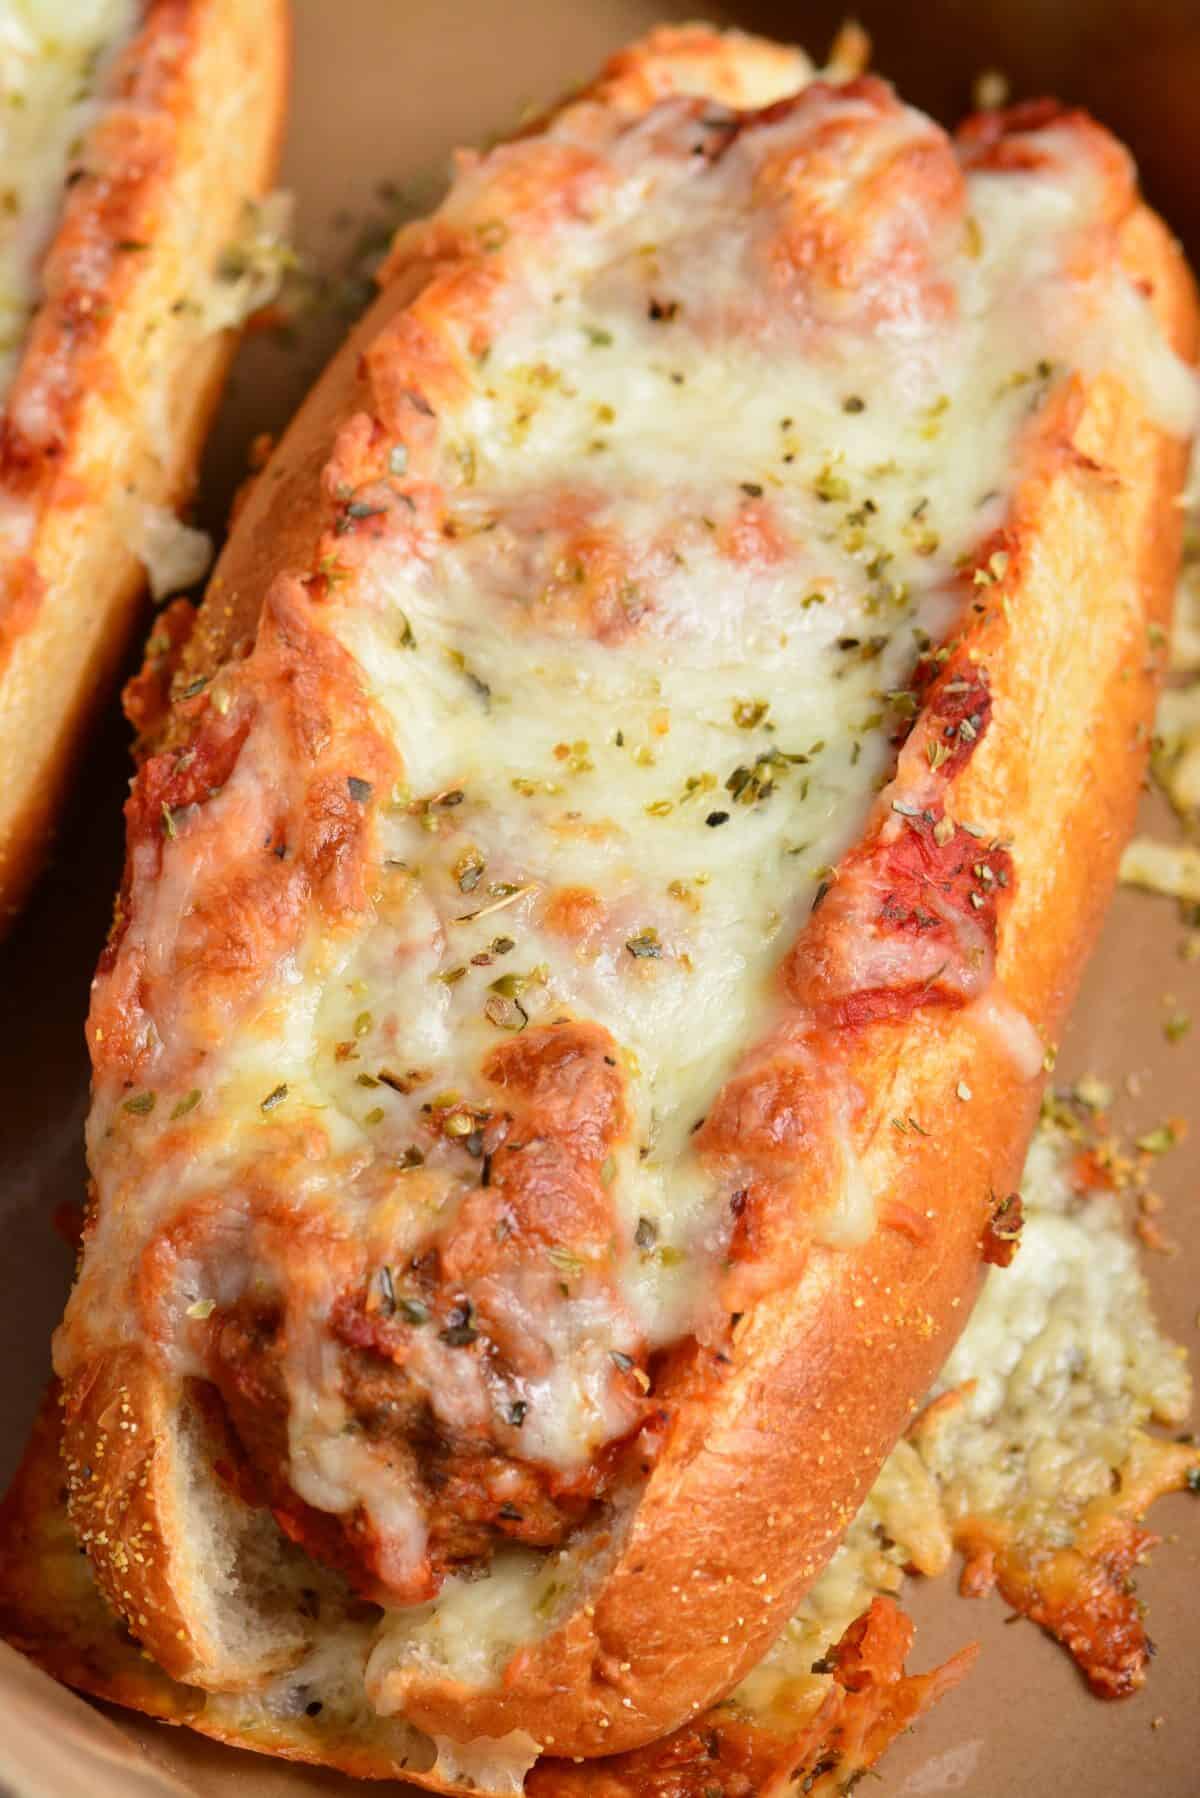 one meatballs sub in a baking dish.